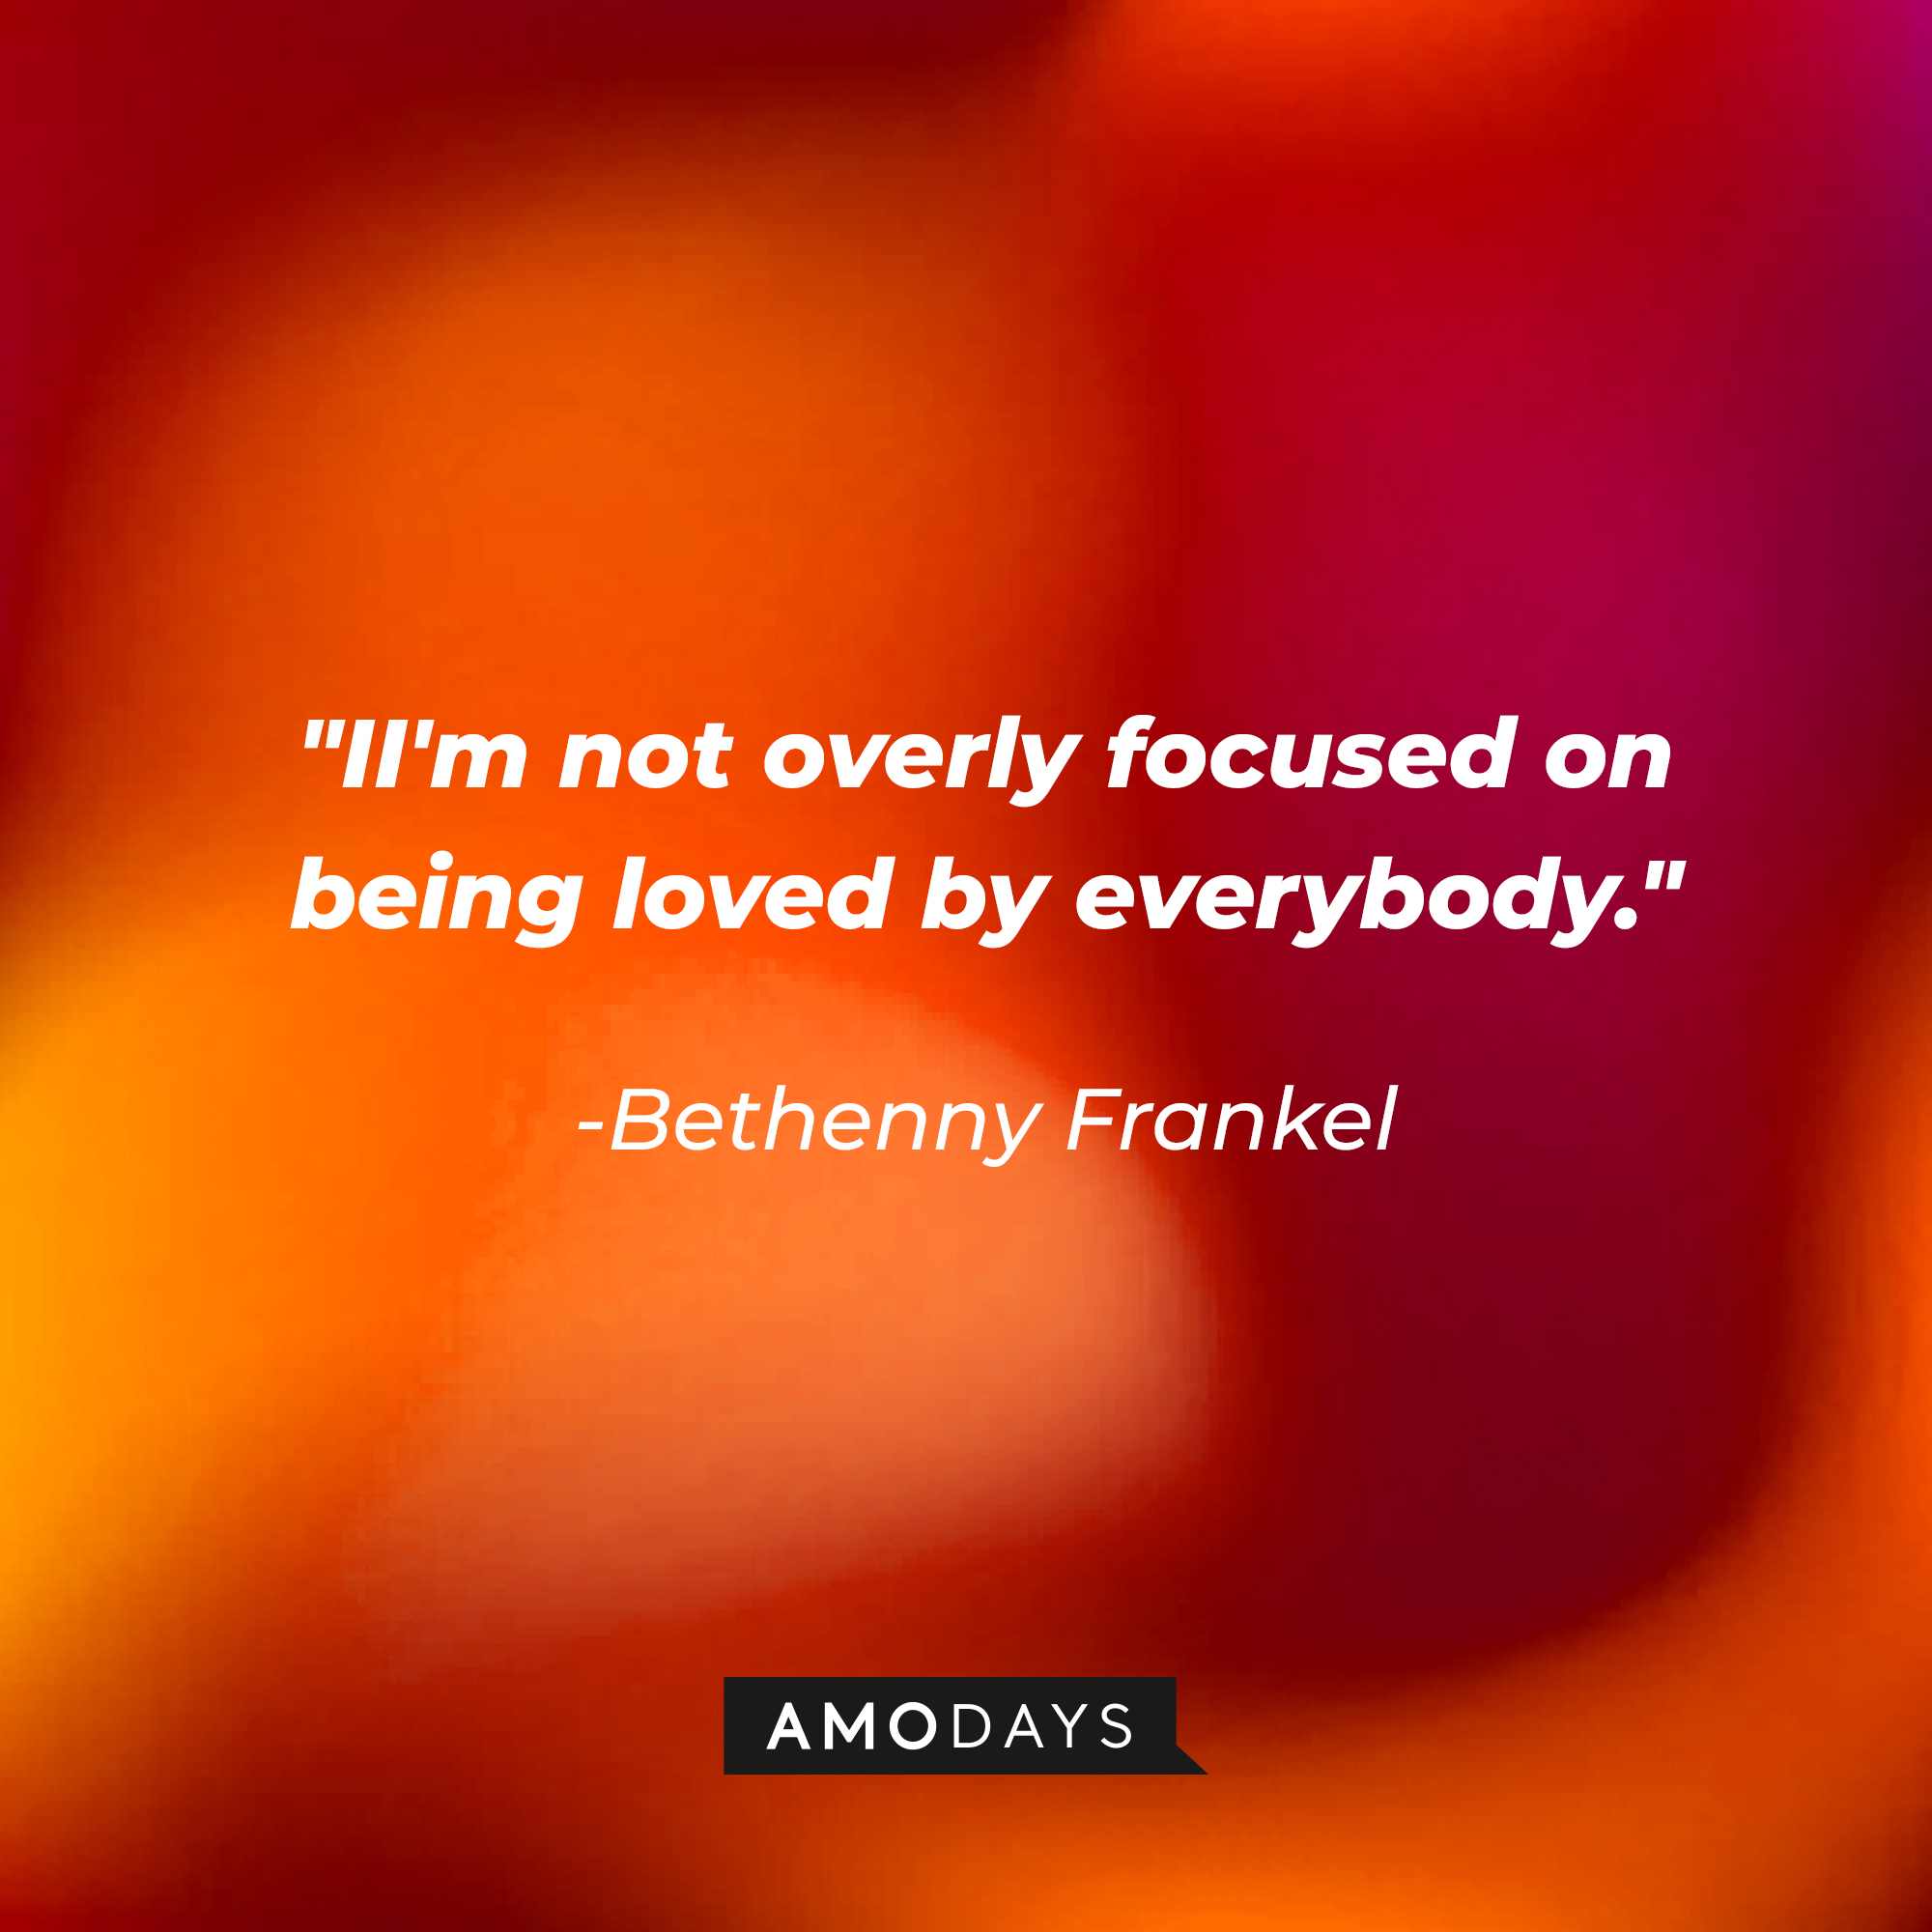 Bethenny Frankel's quote: “I'm not overly focused on being loved by everybody." | Source: Amodays